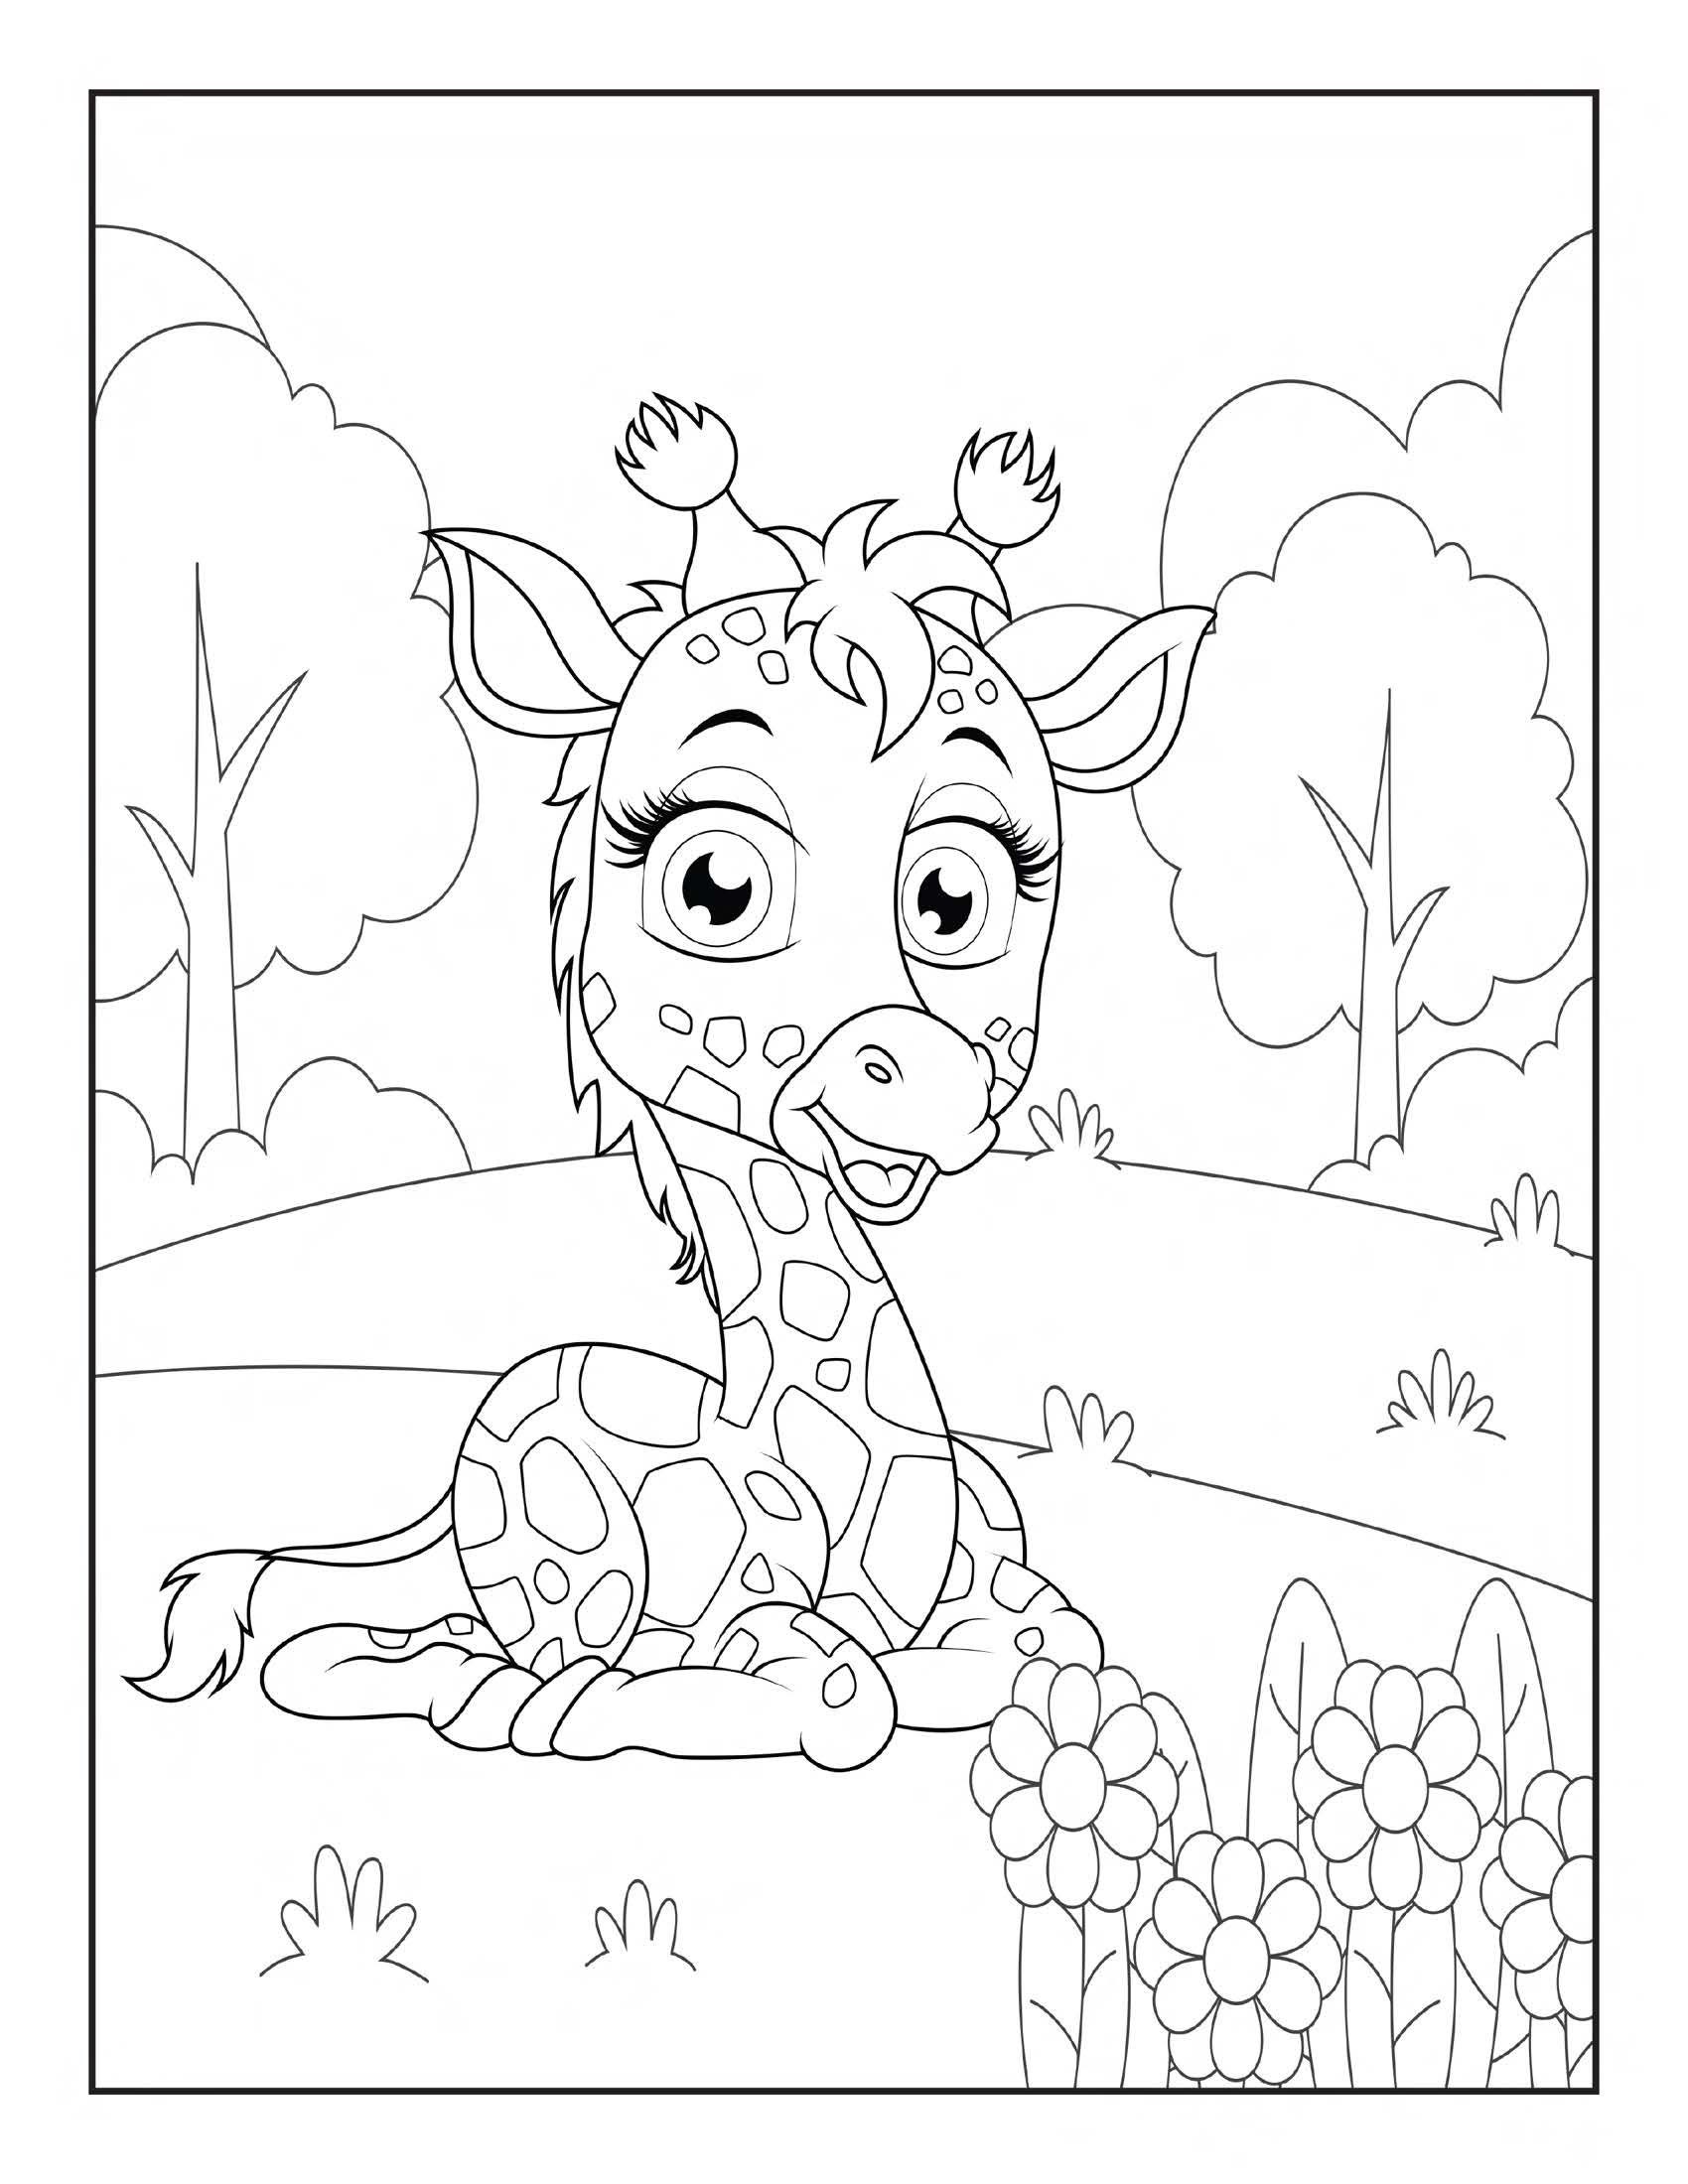 75 Animals Coloring Pages A | Etsy